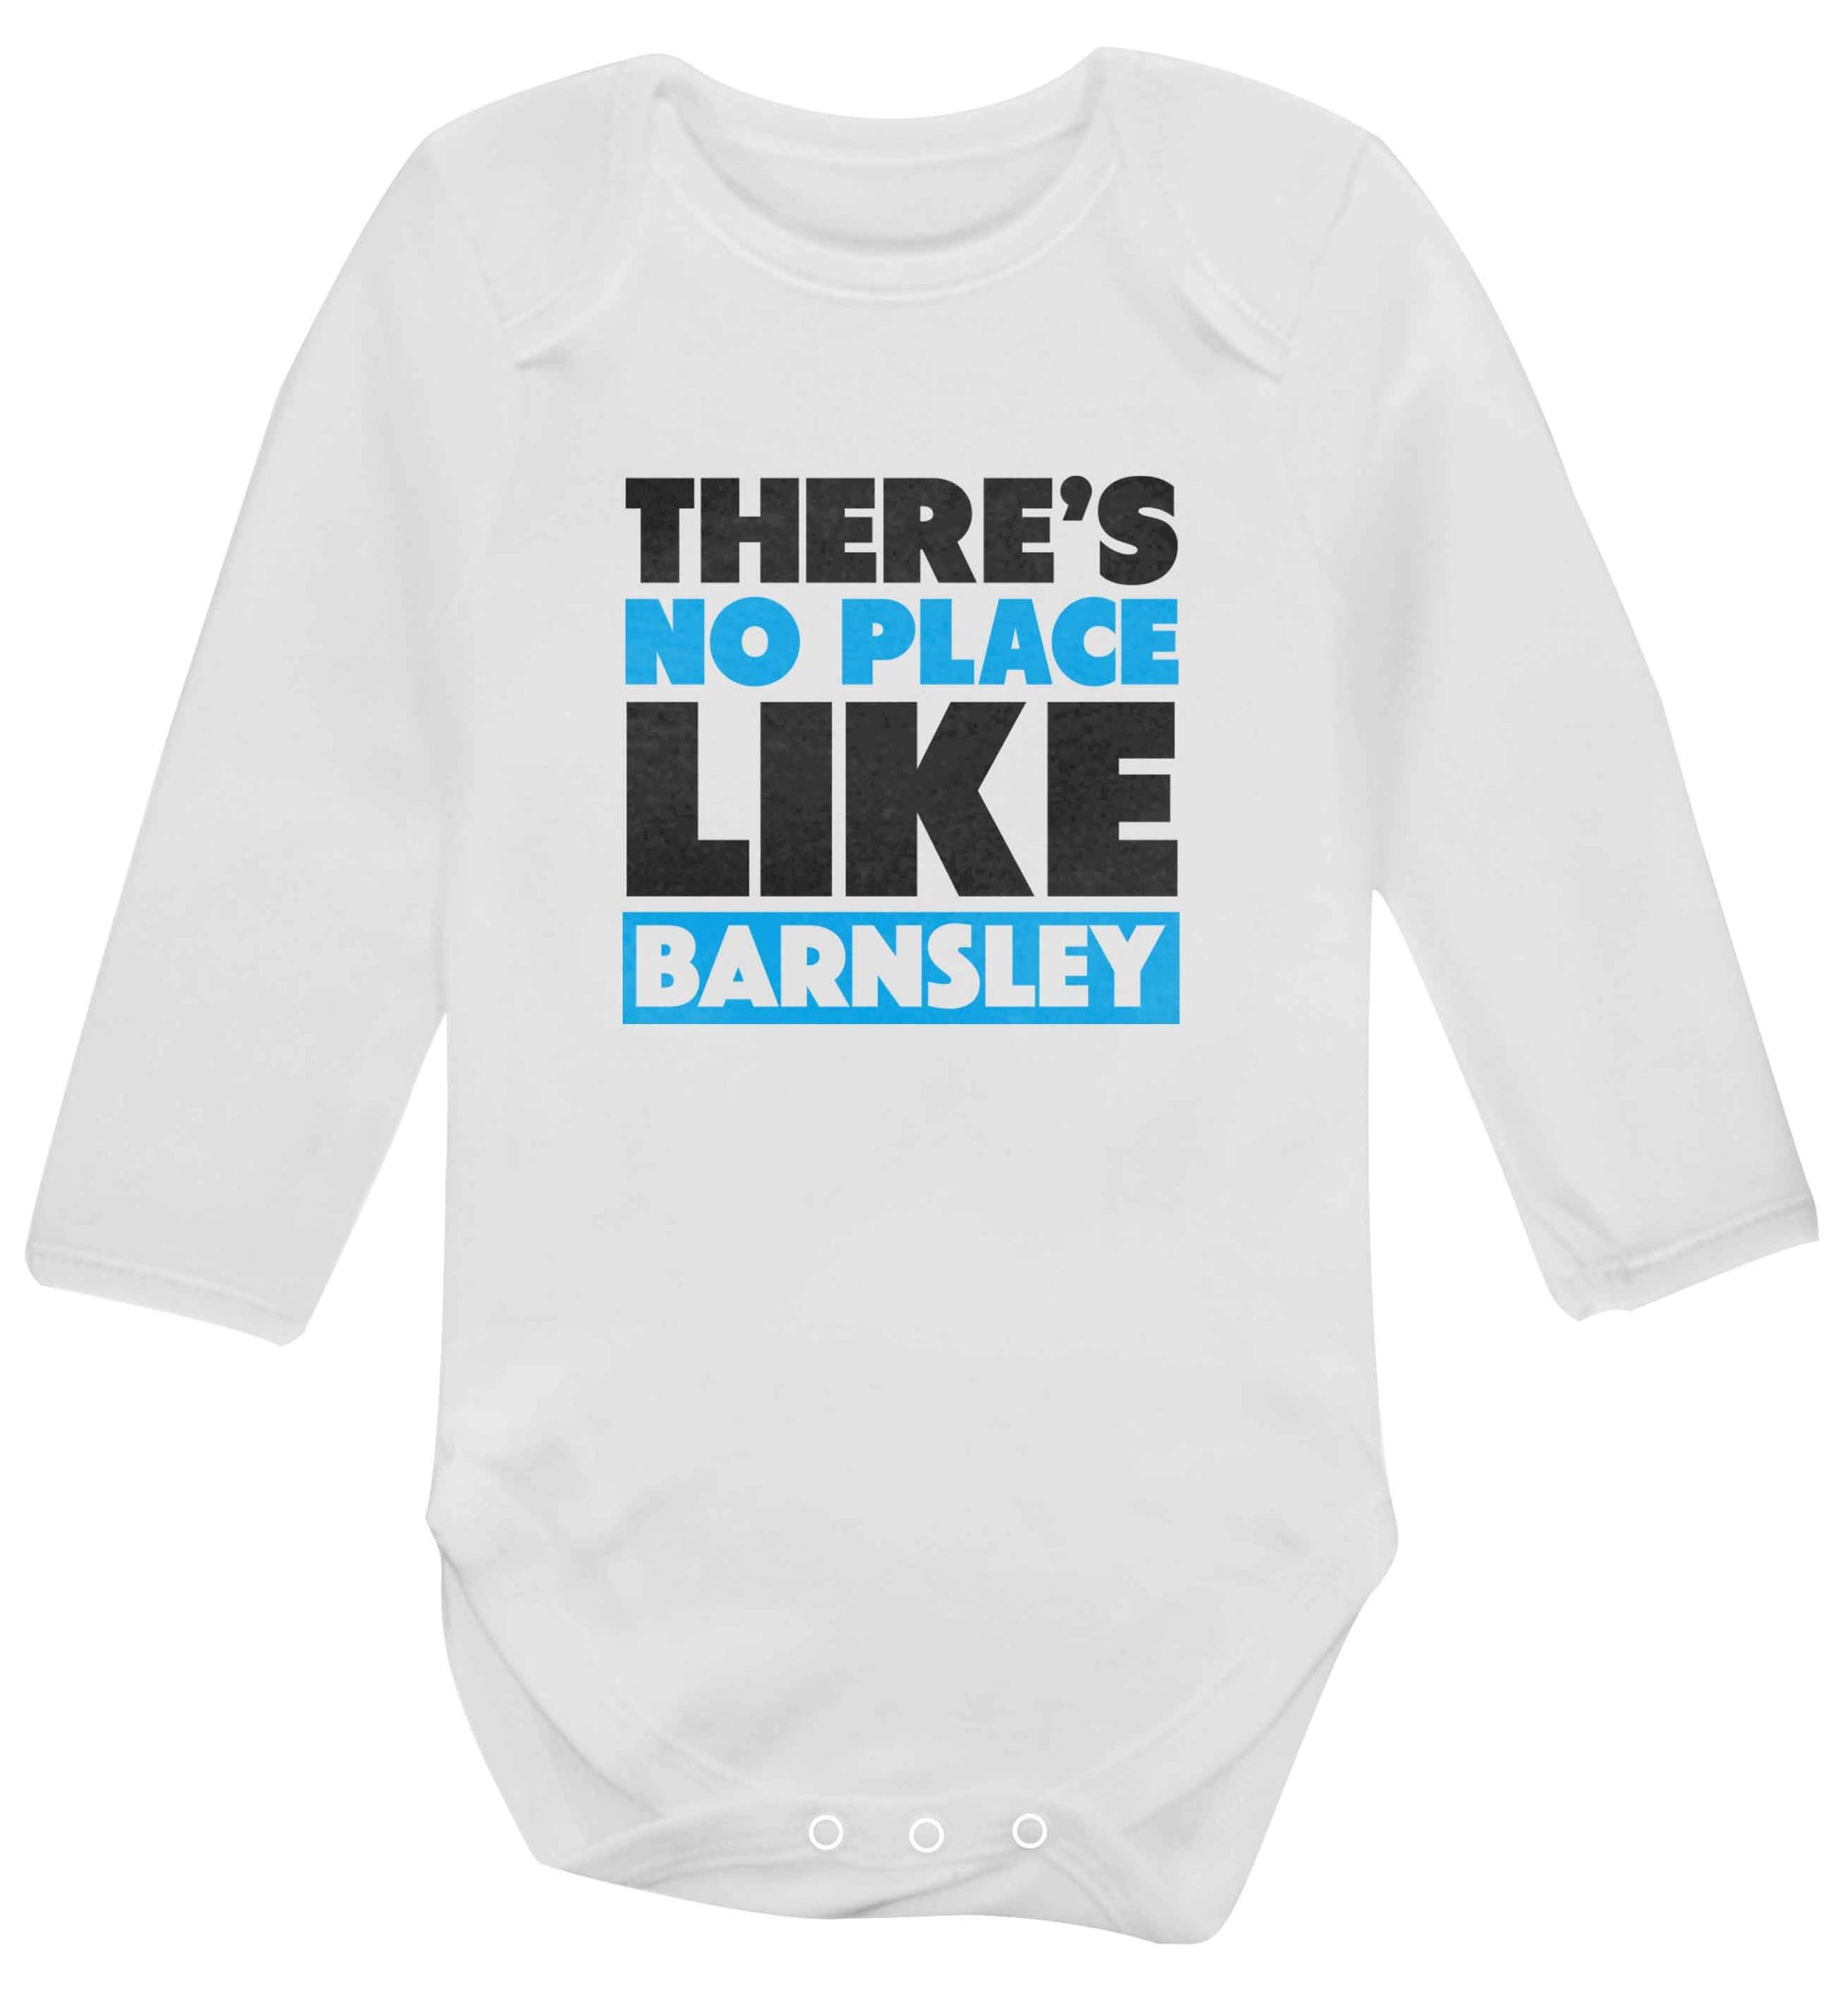 There's No Place Like Barnsley baby vest long sleeved white 6-12 months